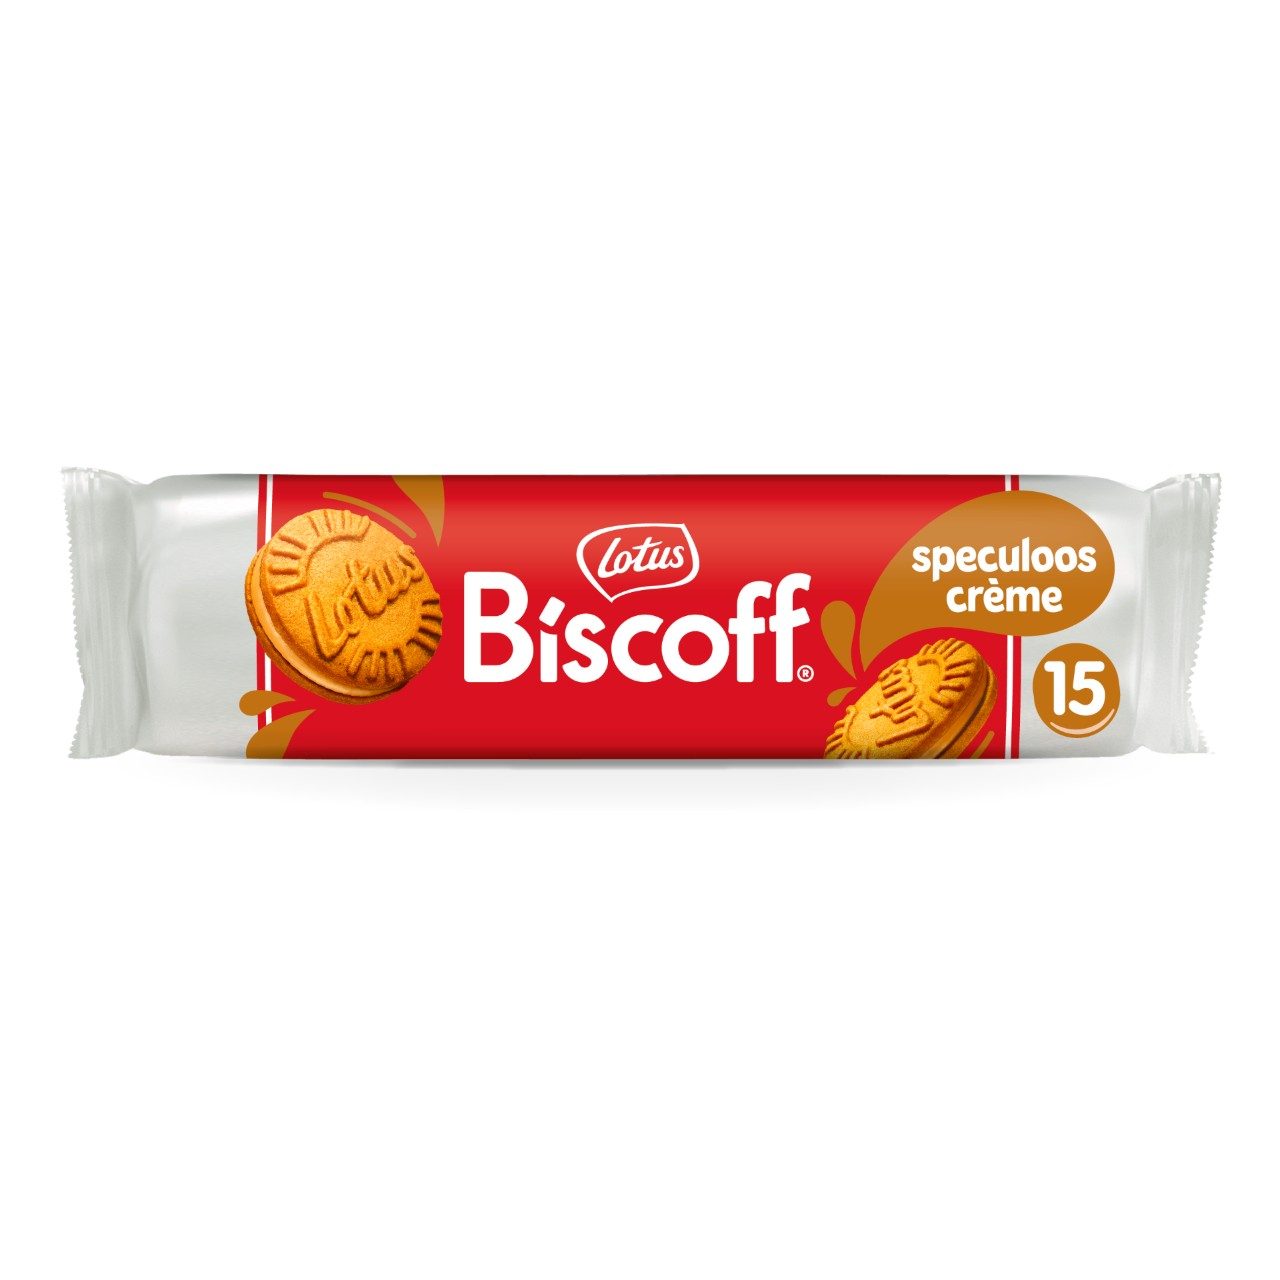 Biscoff speculoos creme